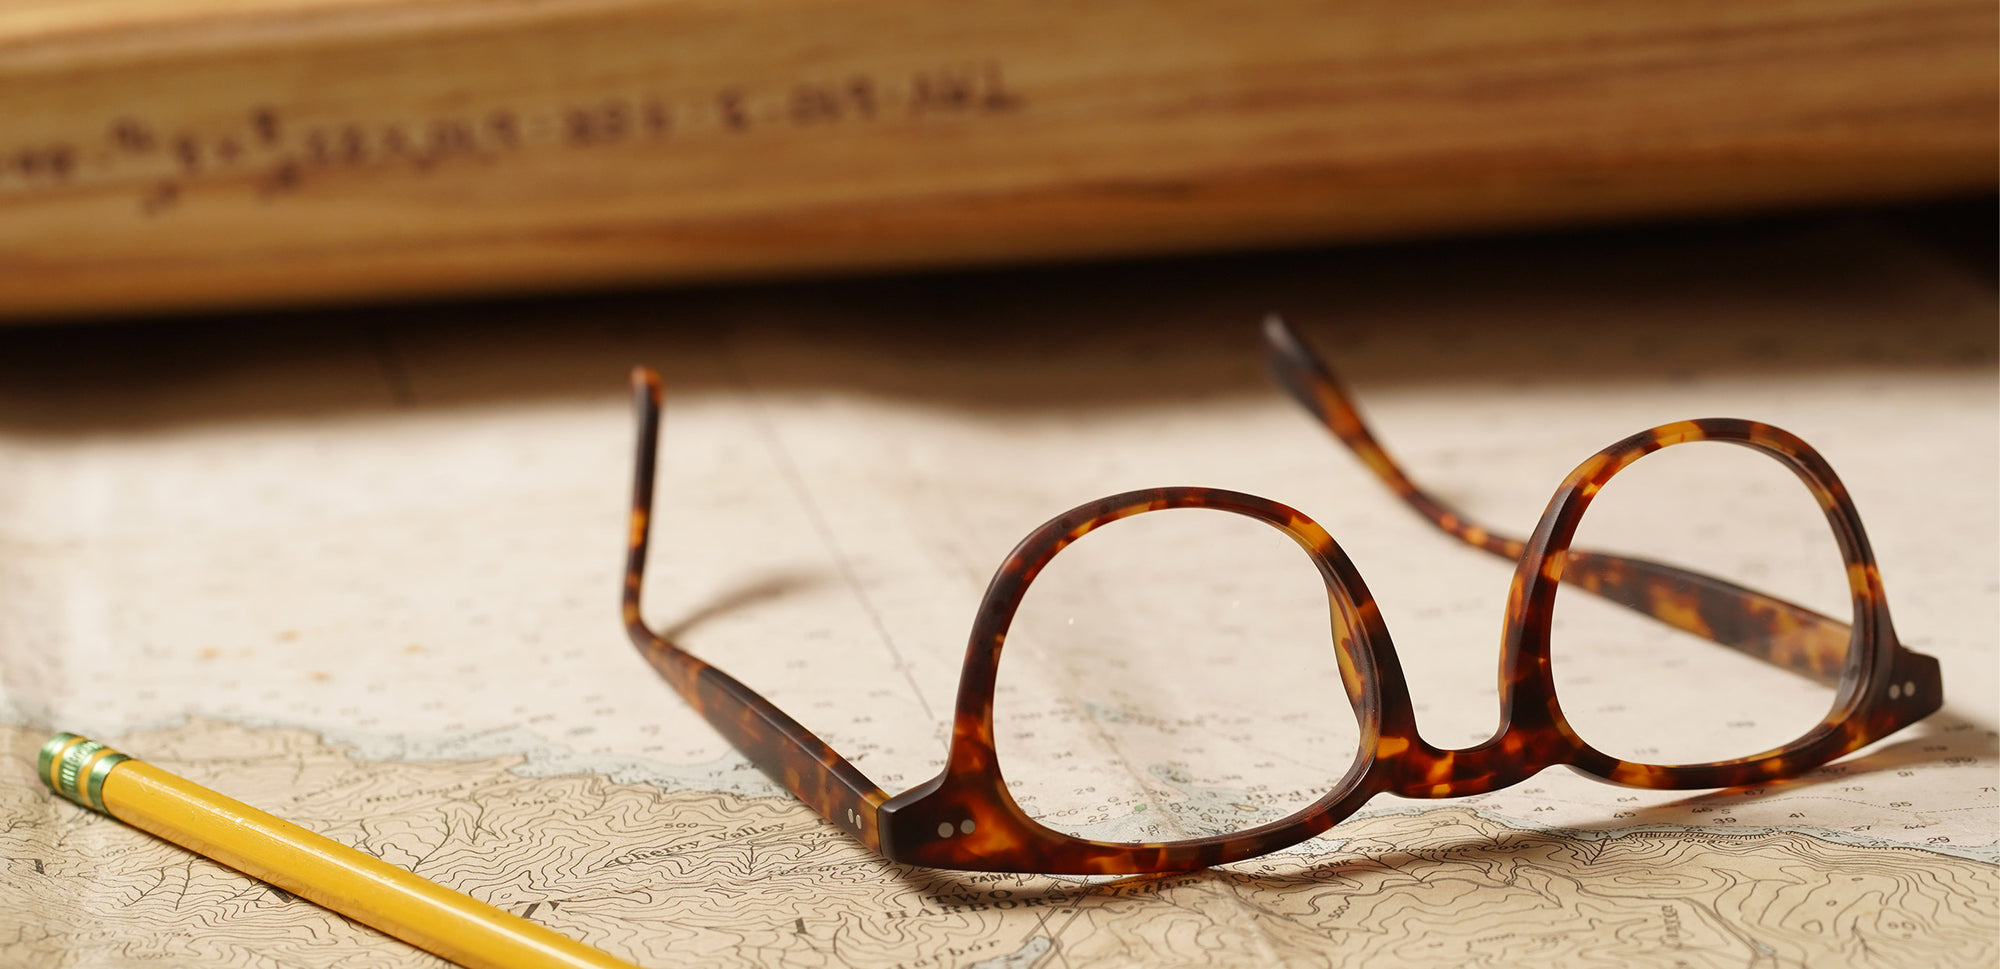 Selecting the proper lens material for your new glasses